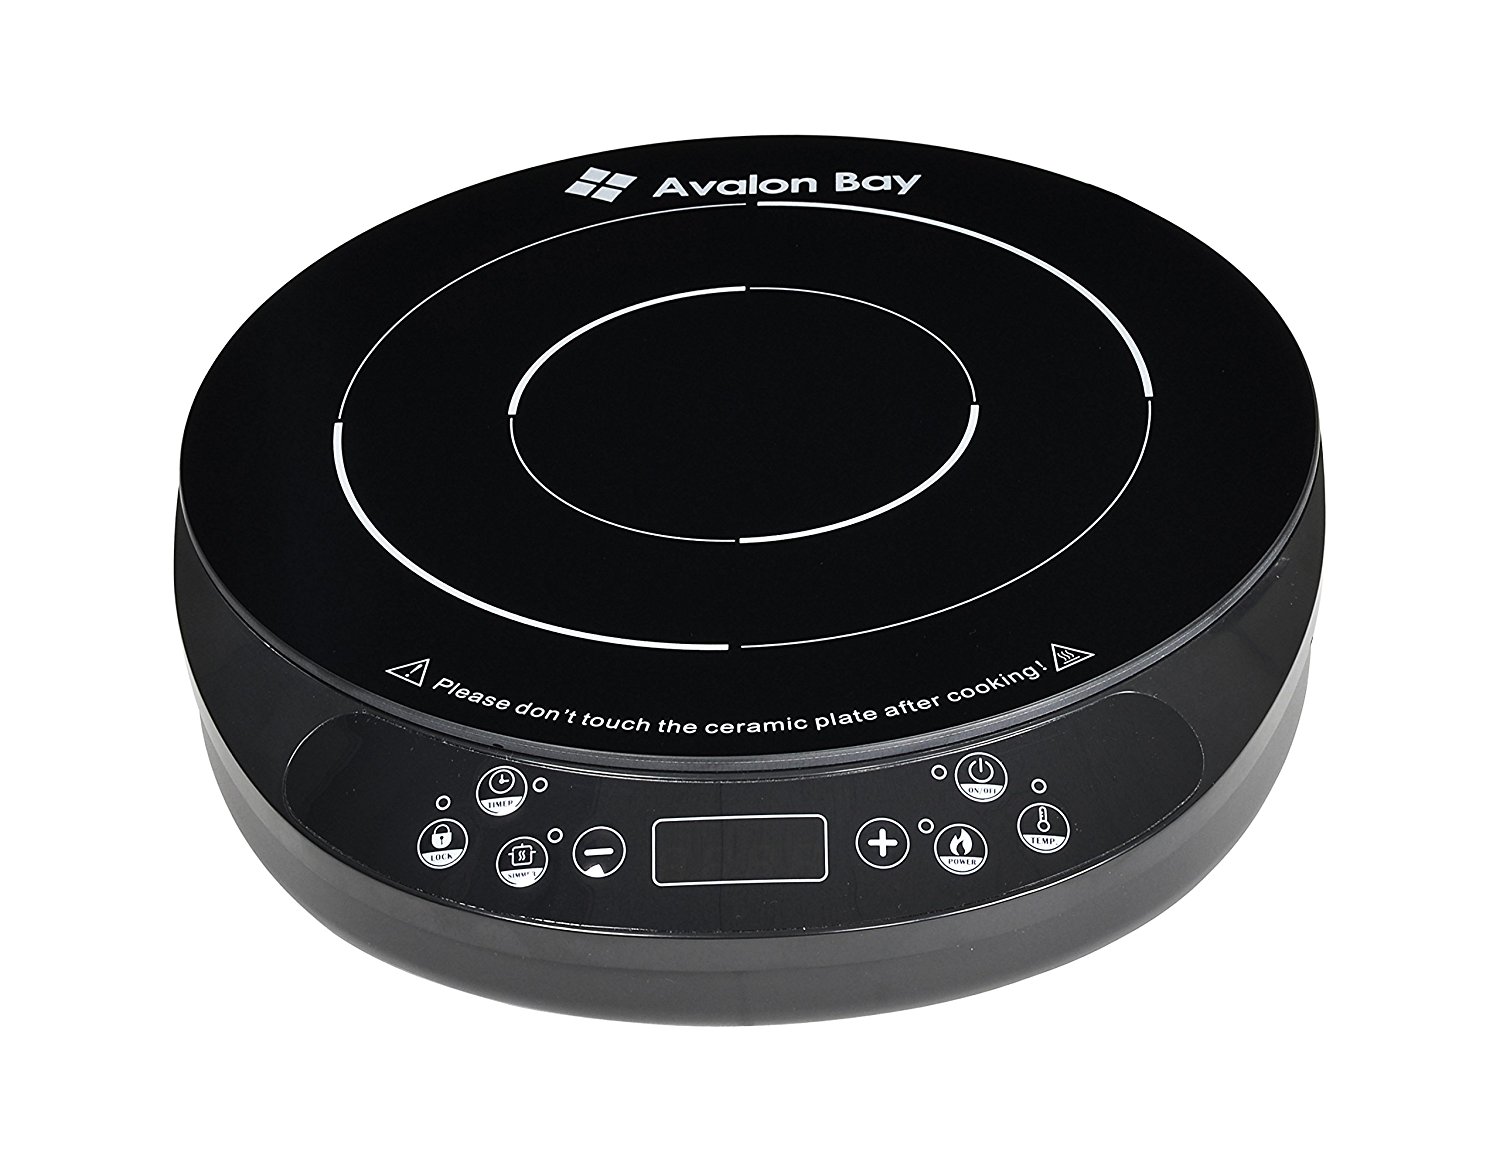 Induction Cooktop by Avalon Bay, 1800 Watts, Euro Edition (Temperature in Celsius) IC200B